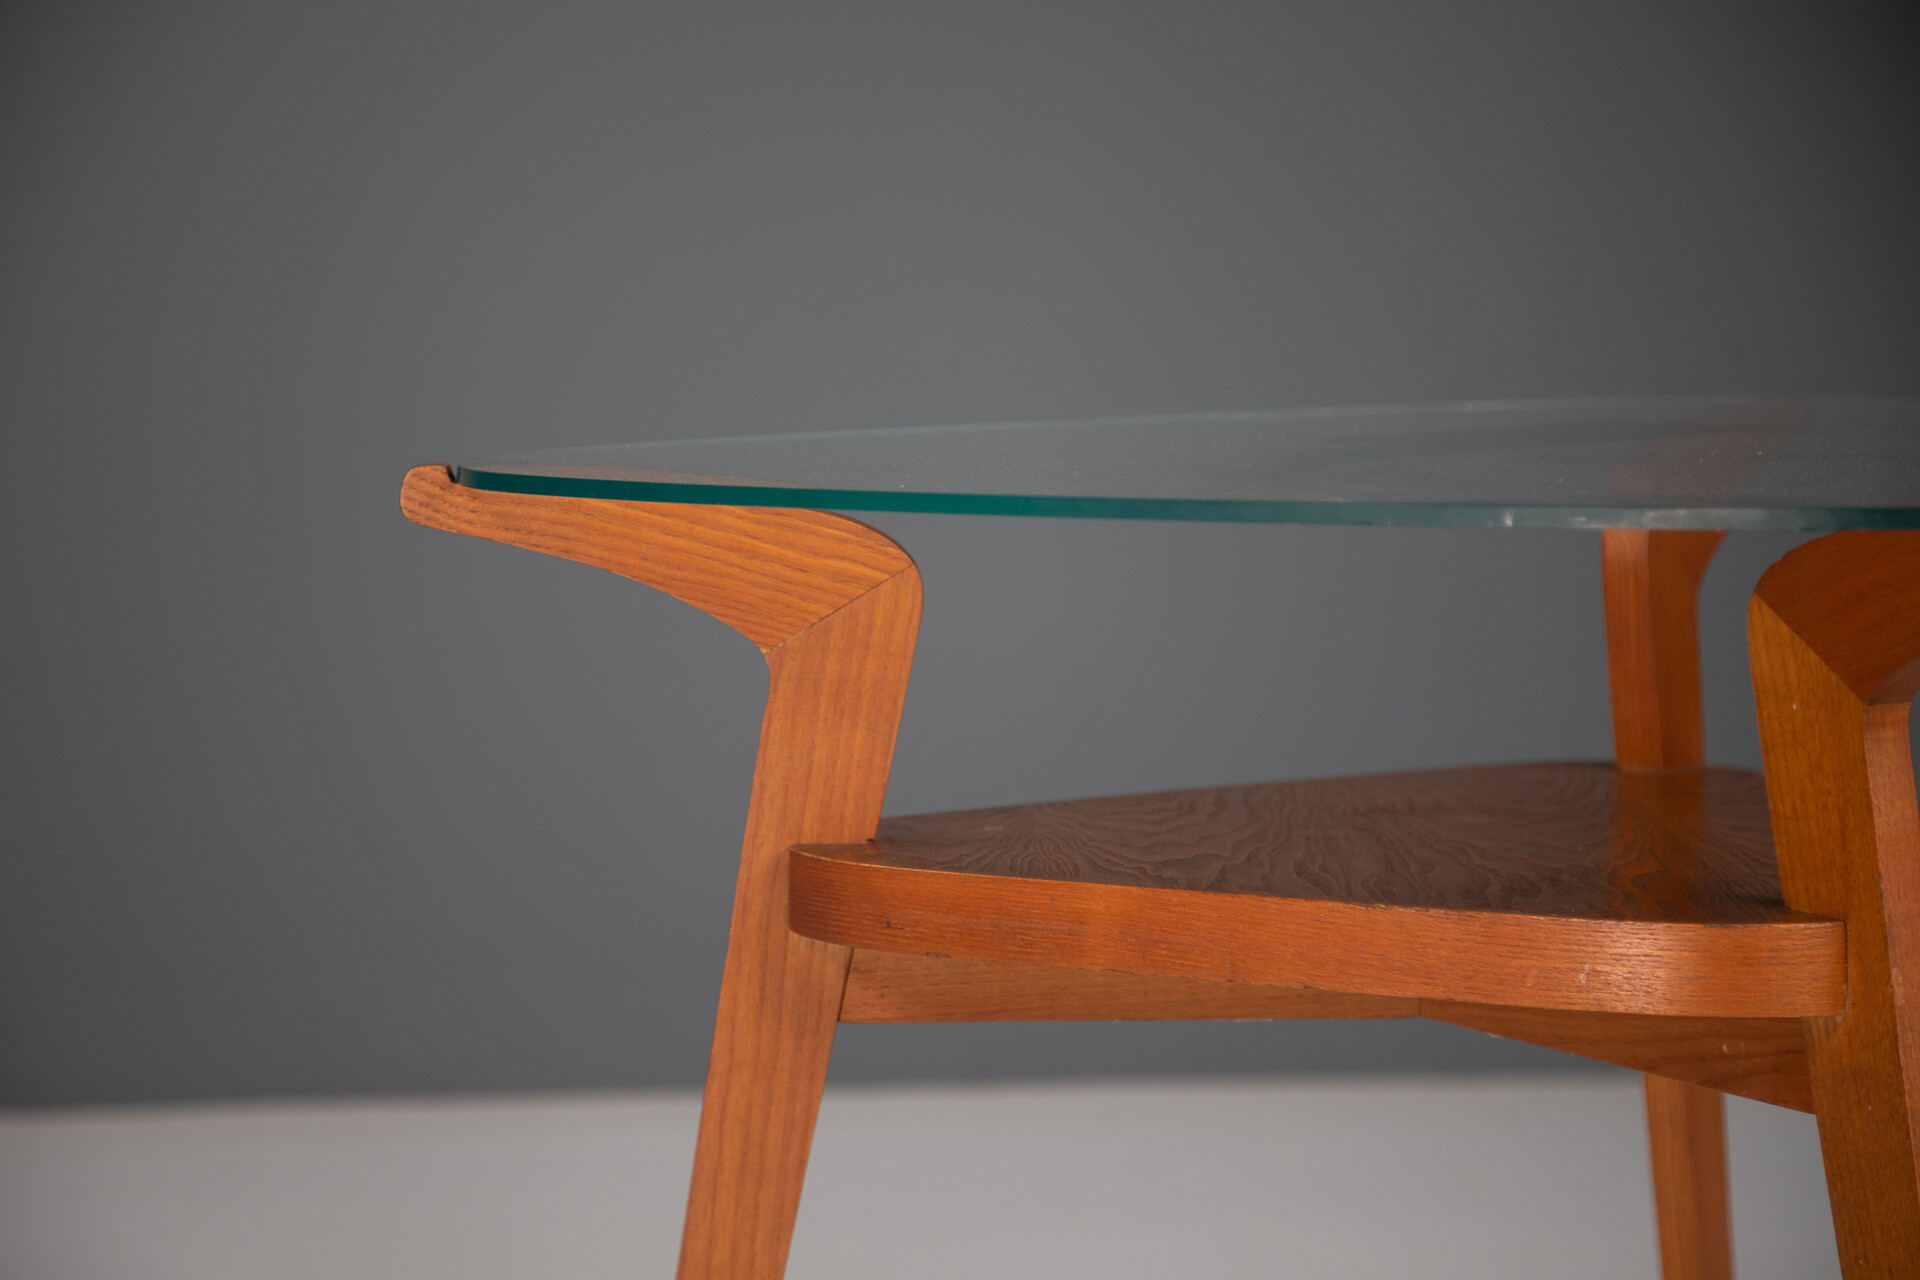 Mid century modern Wood and glass side / coffee table , France 1950s Mid-20th century